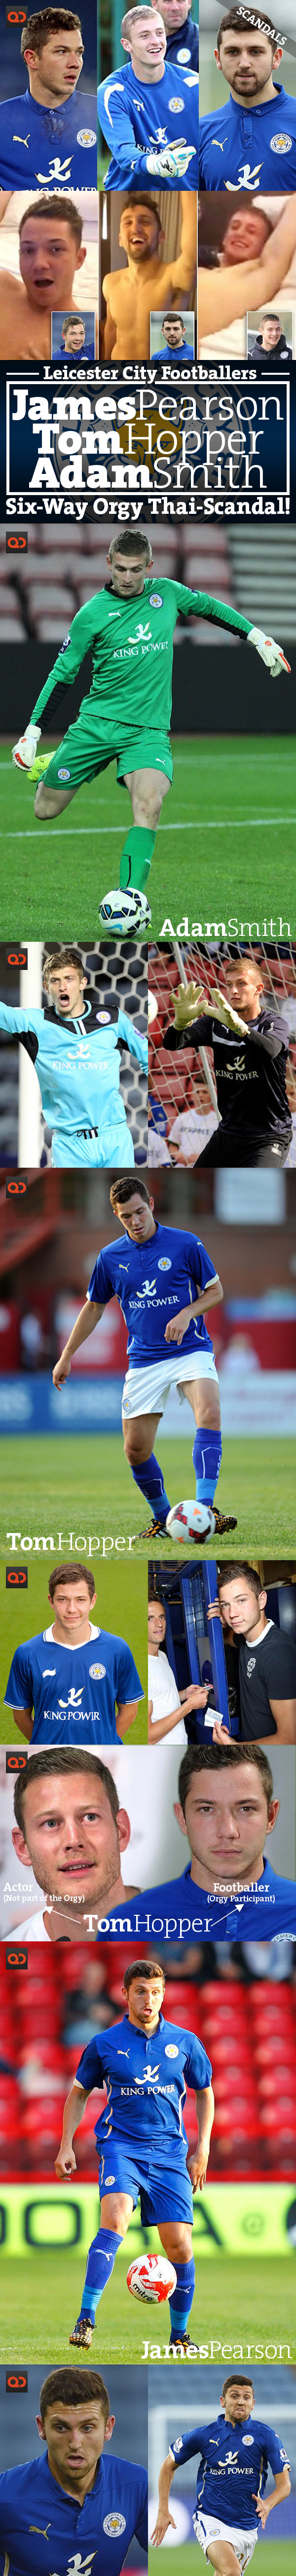 qc-scandals-leicester-city-footballers-james-pearson-tom-hopper-adamsmith-orgy-collage01